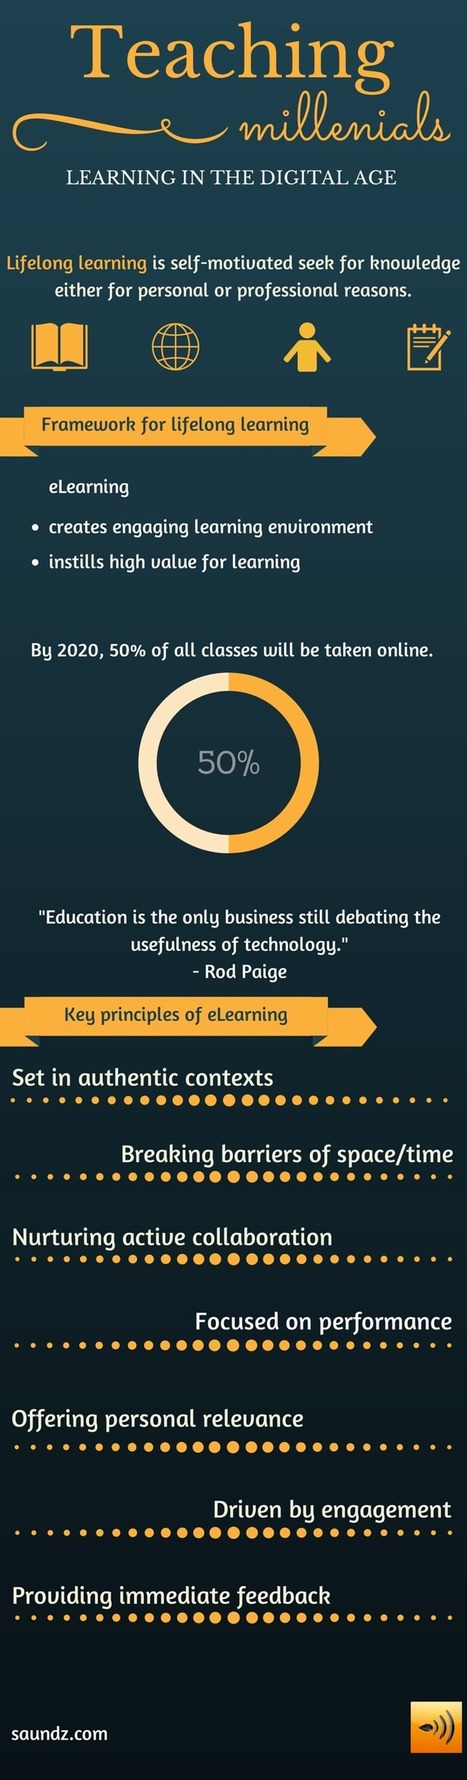 The eLearning Principles for Teaching Millennials Infographic | iGeneration - 21st Century Education (Pedagogy & Digital Innovation) | Scoop.it